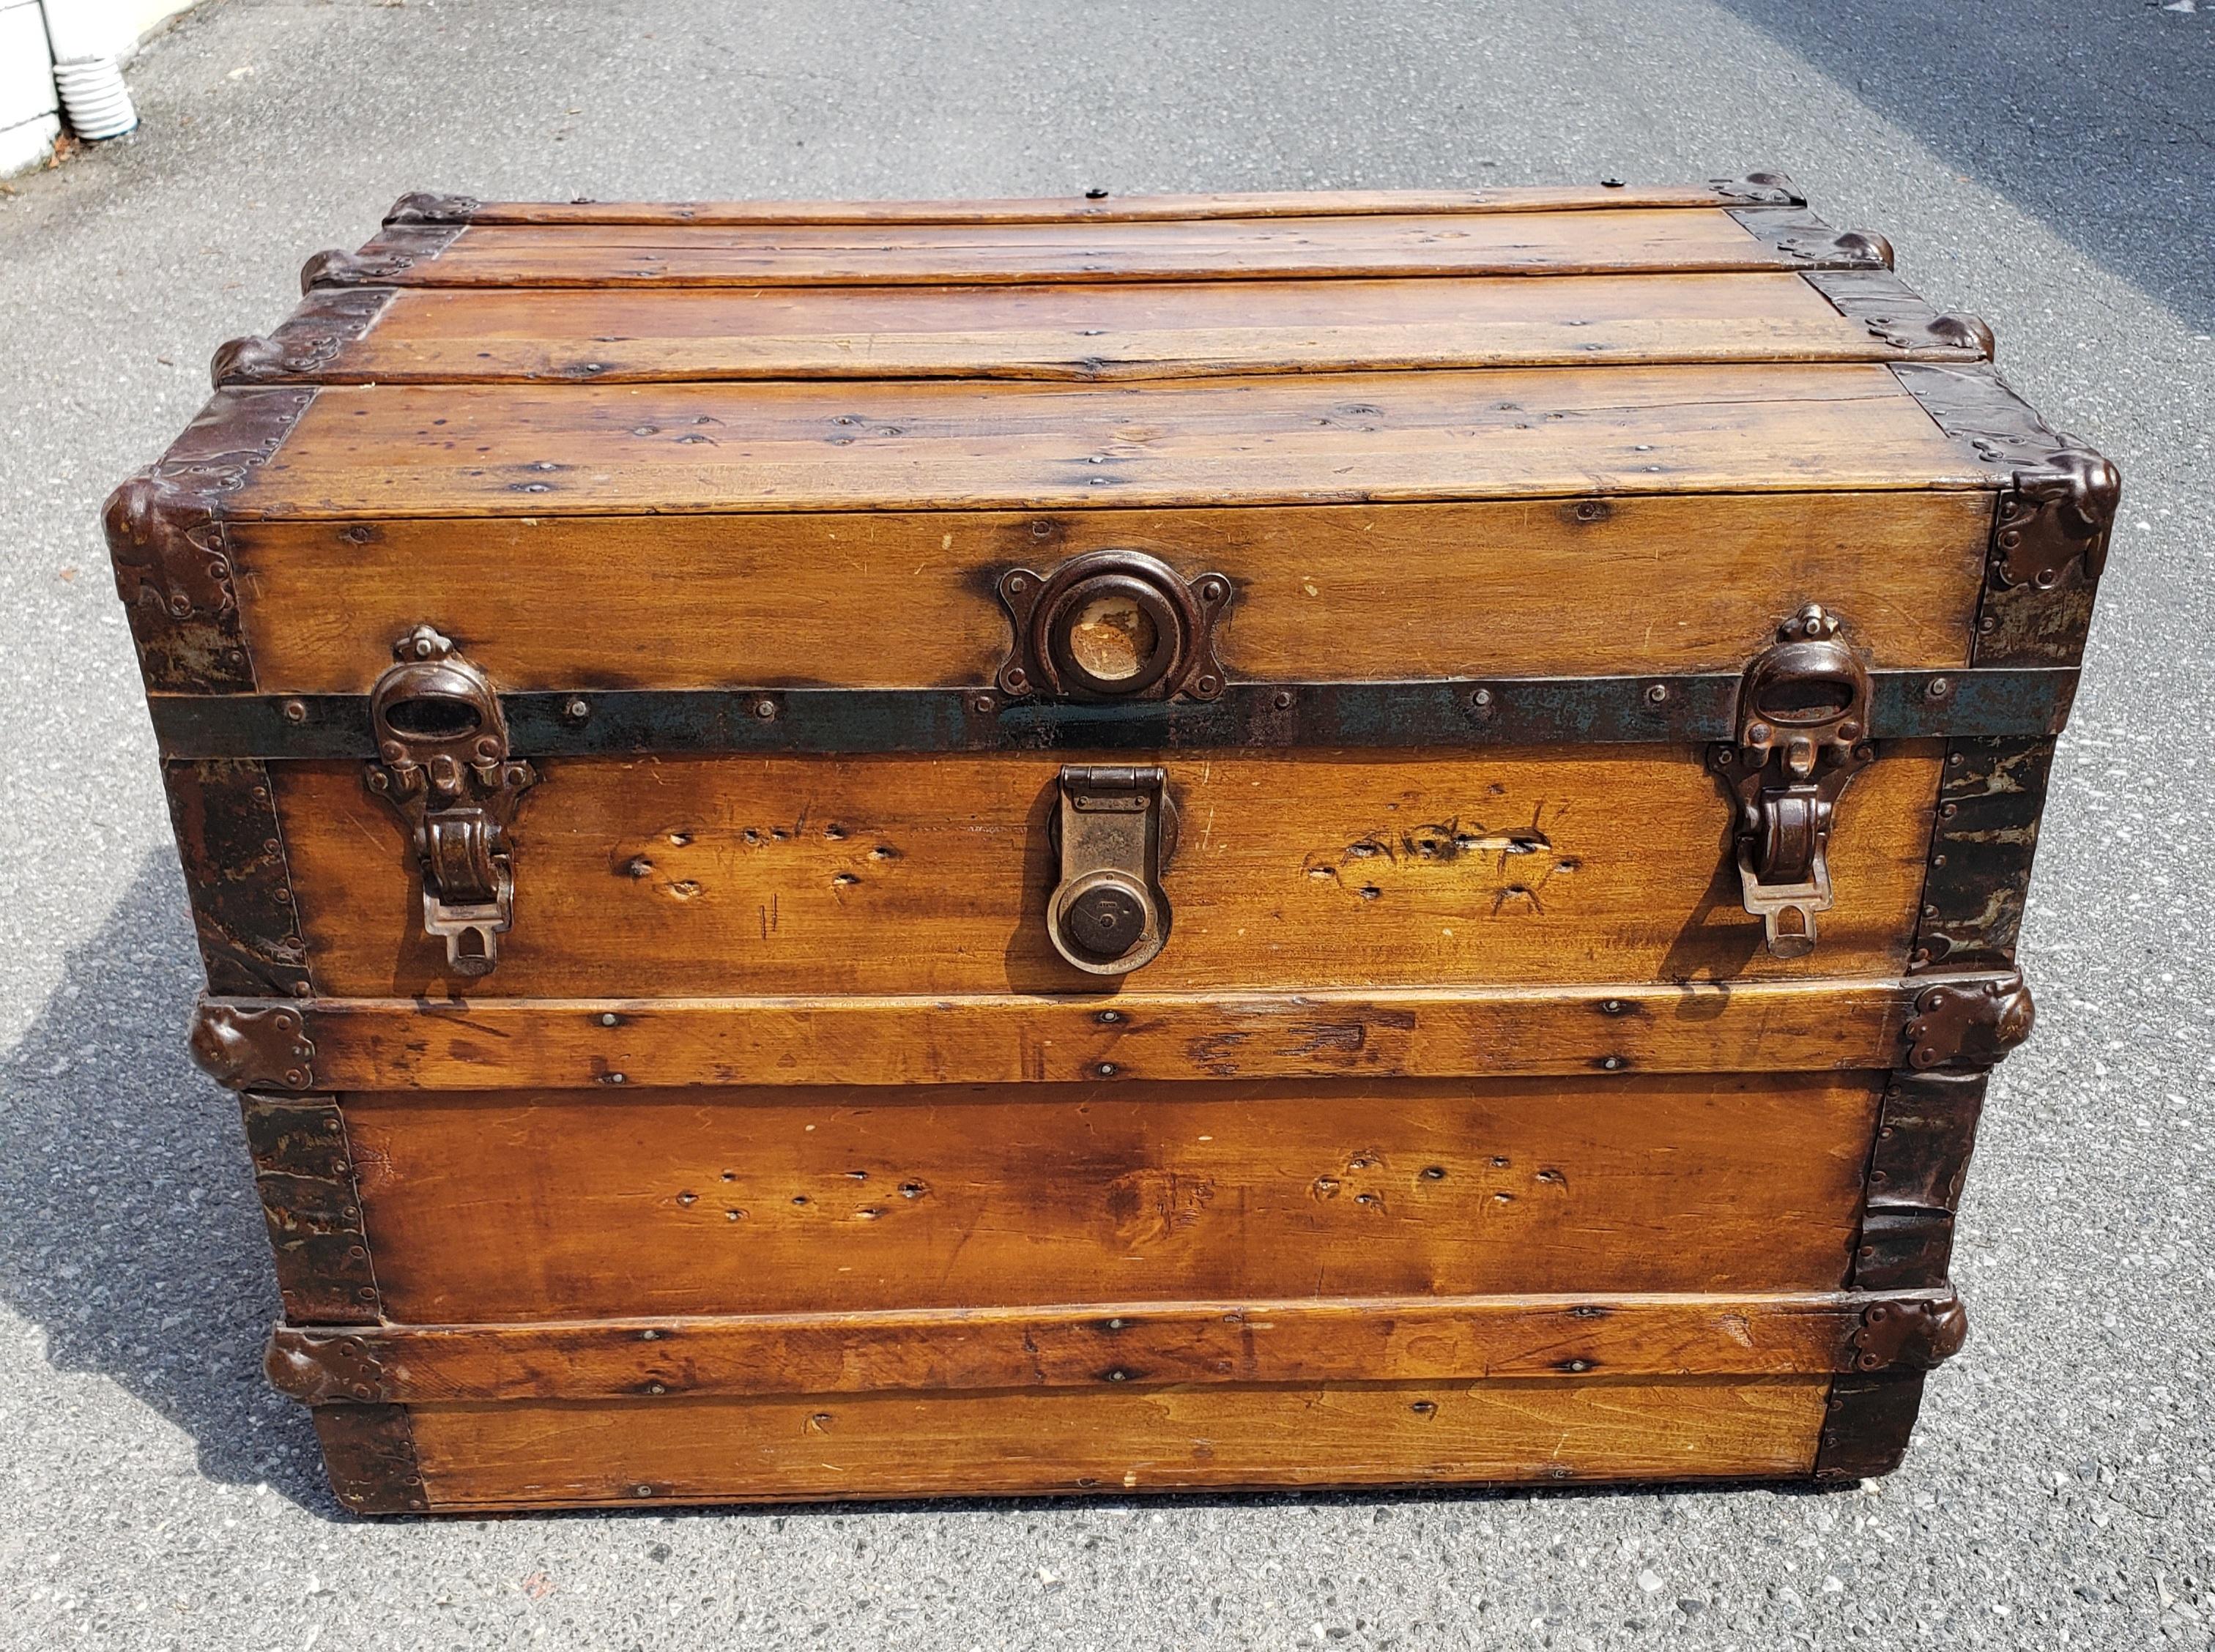 Early 20th Century American pine Blanket Trunk. Textile lined interior. Functional Leather handles.  Measures 33